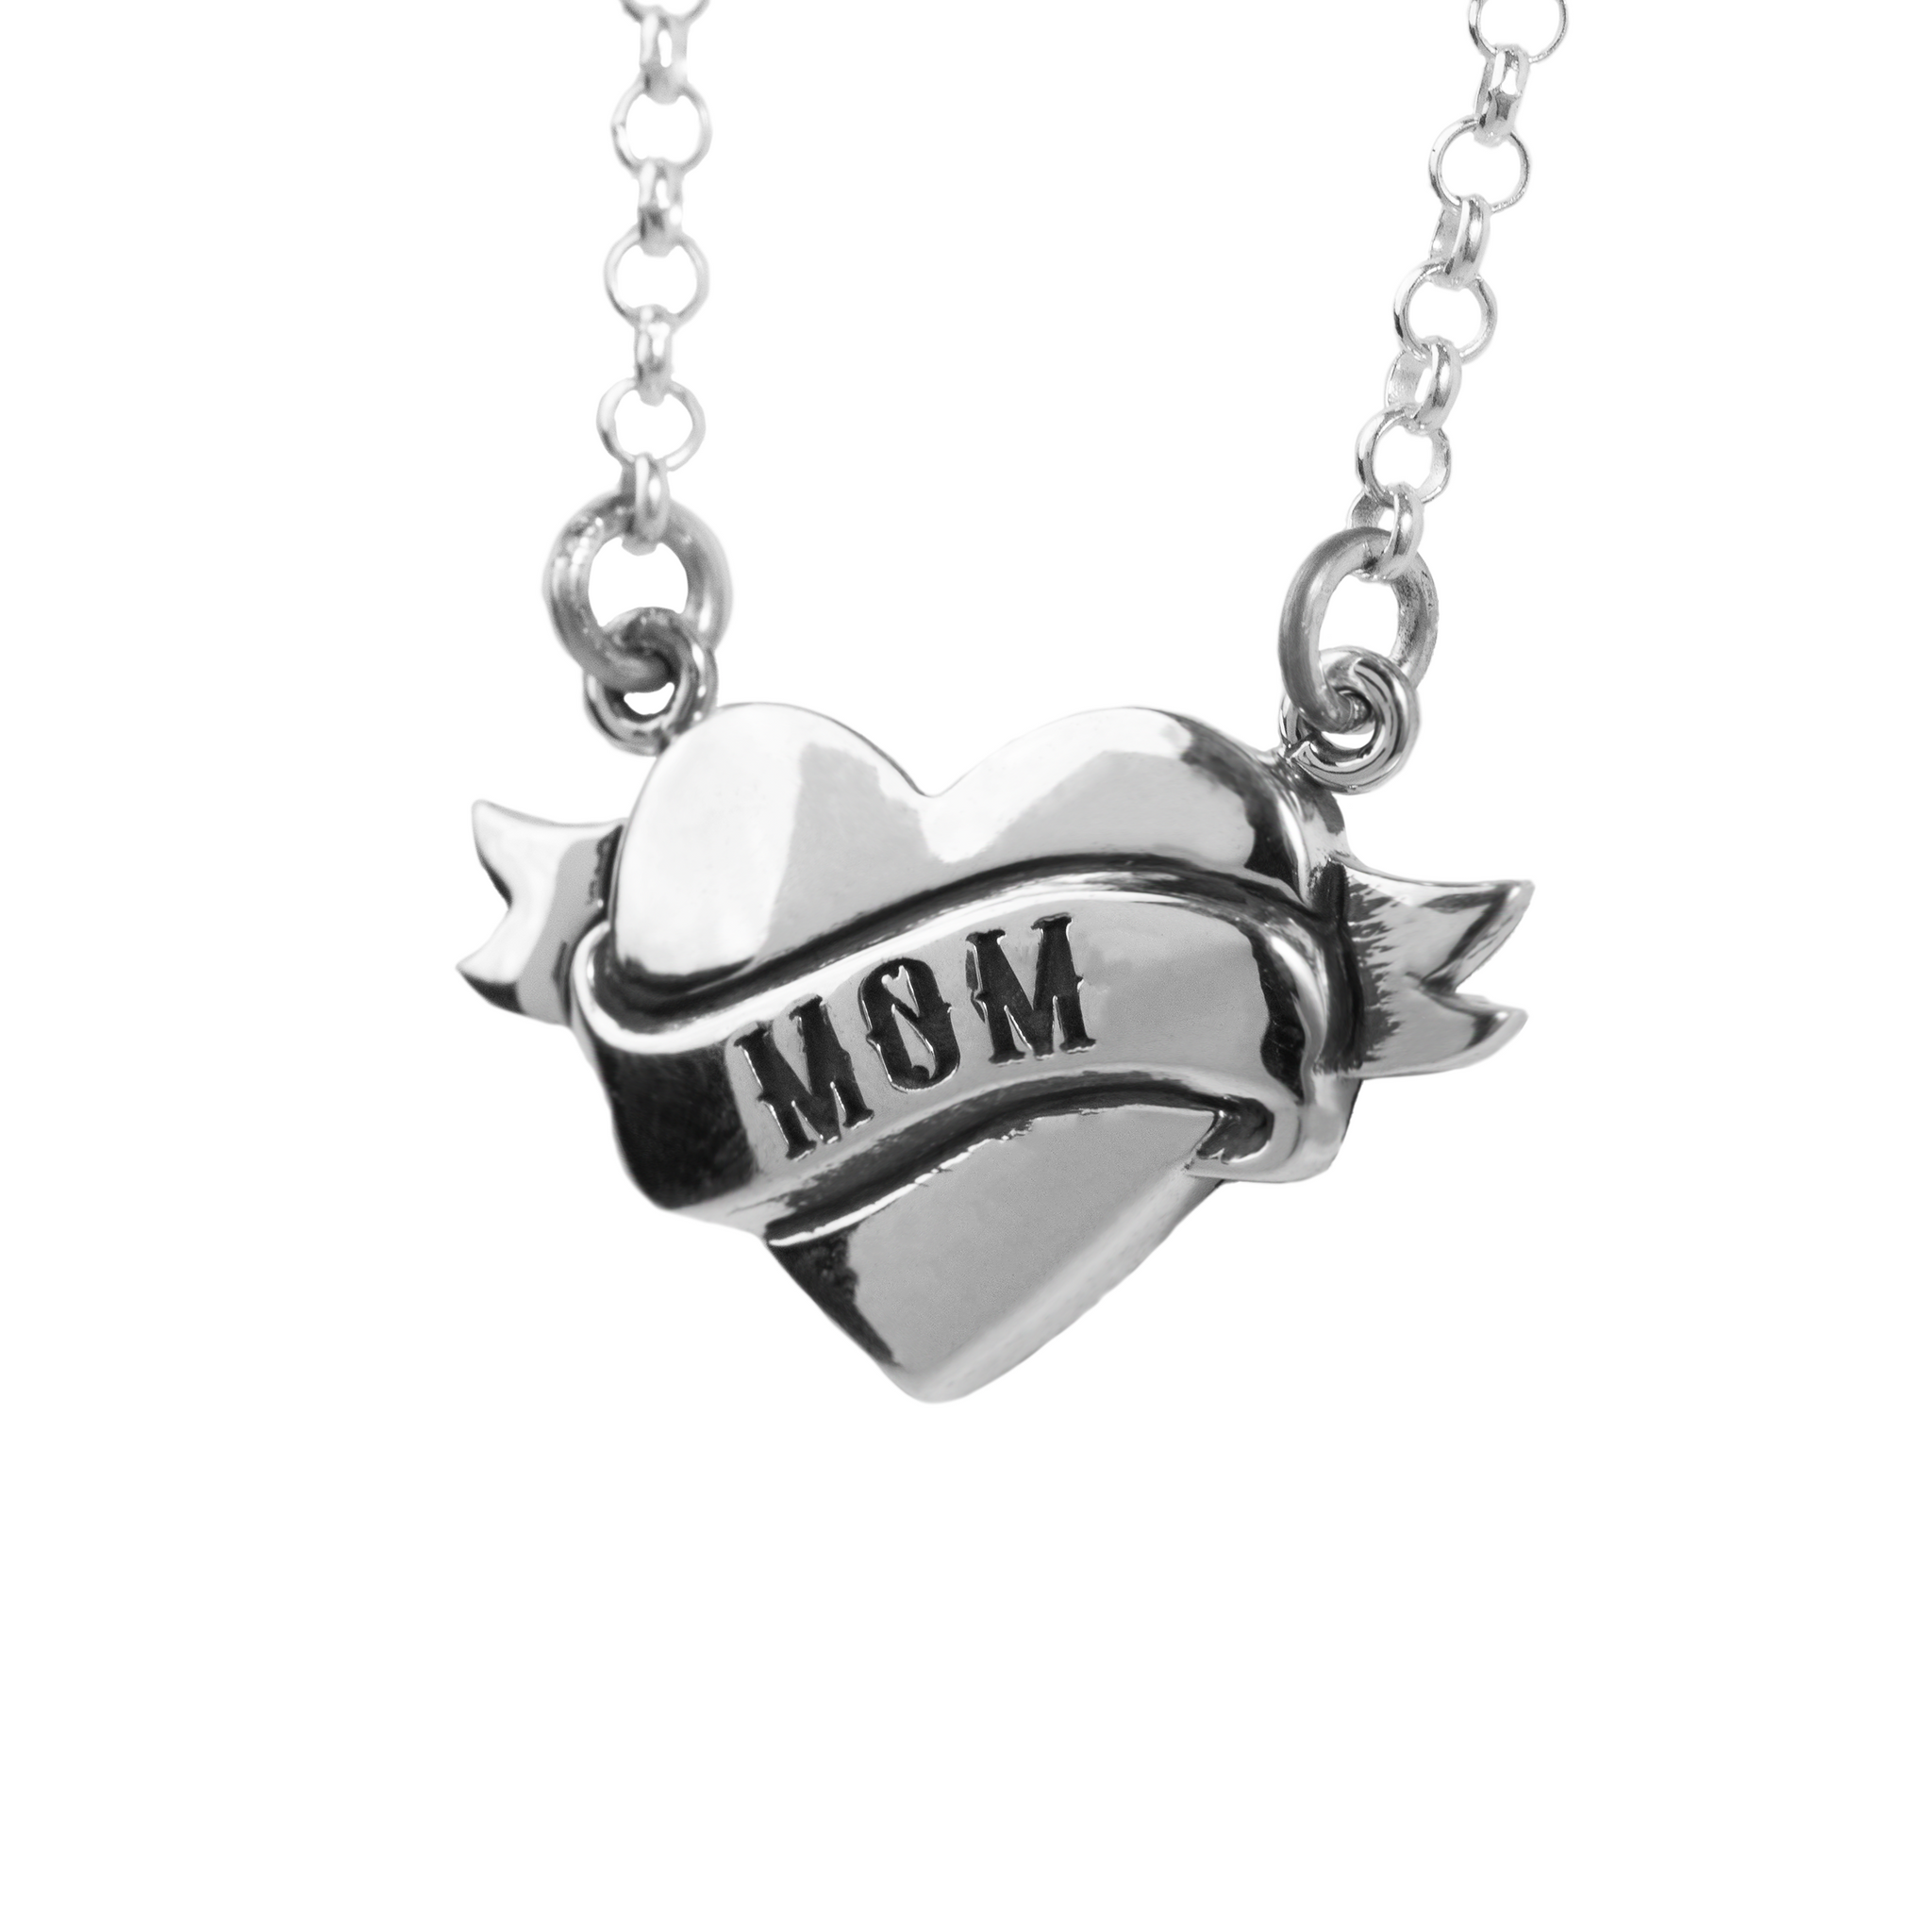 Tattoo Mom Heart Necklace on white background close up